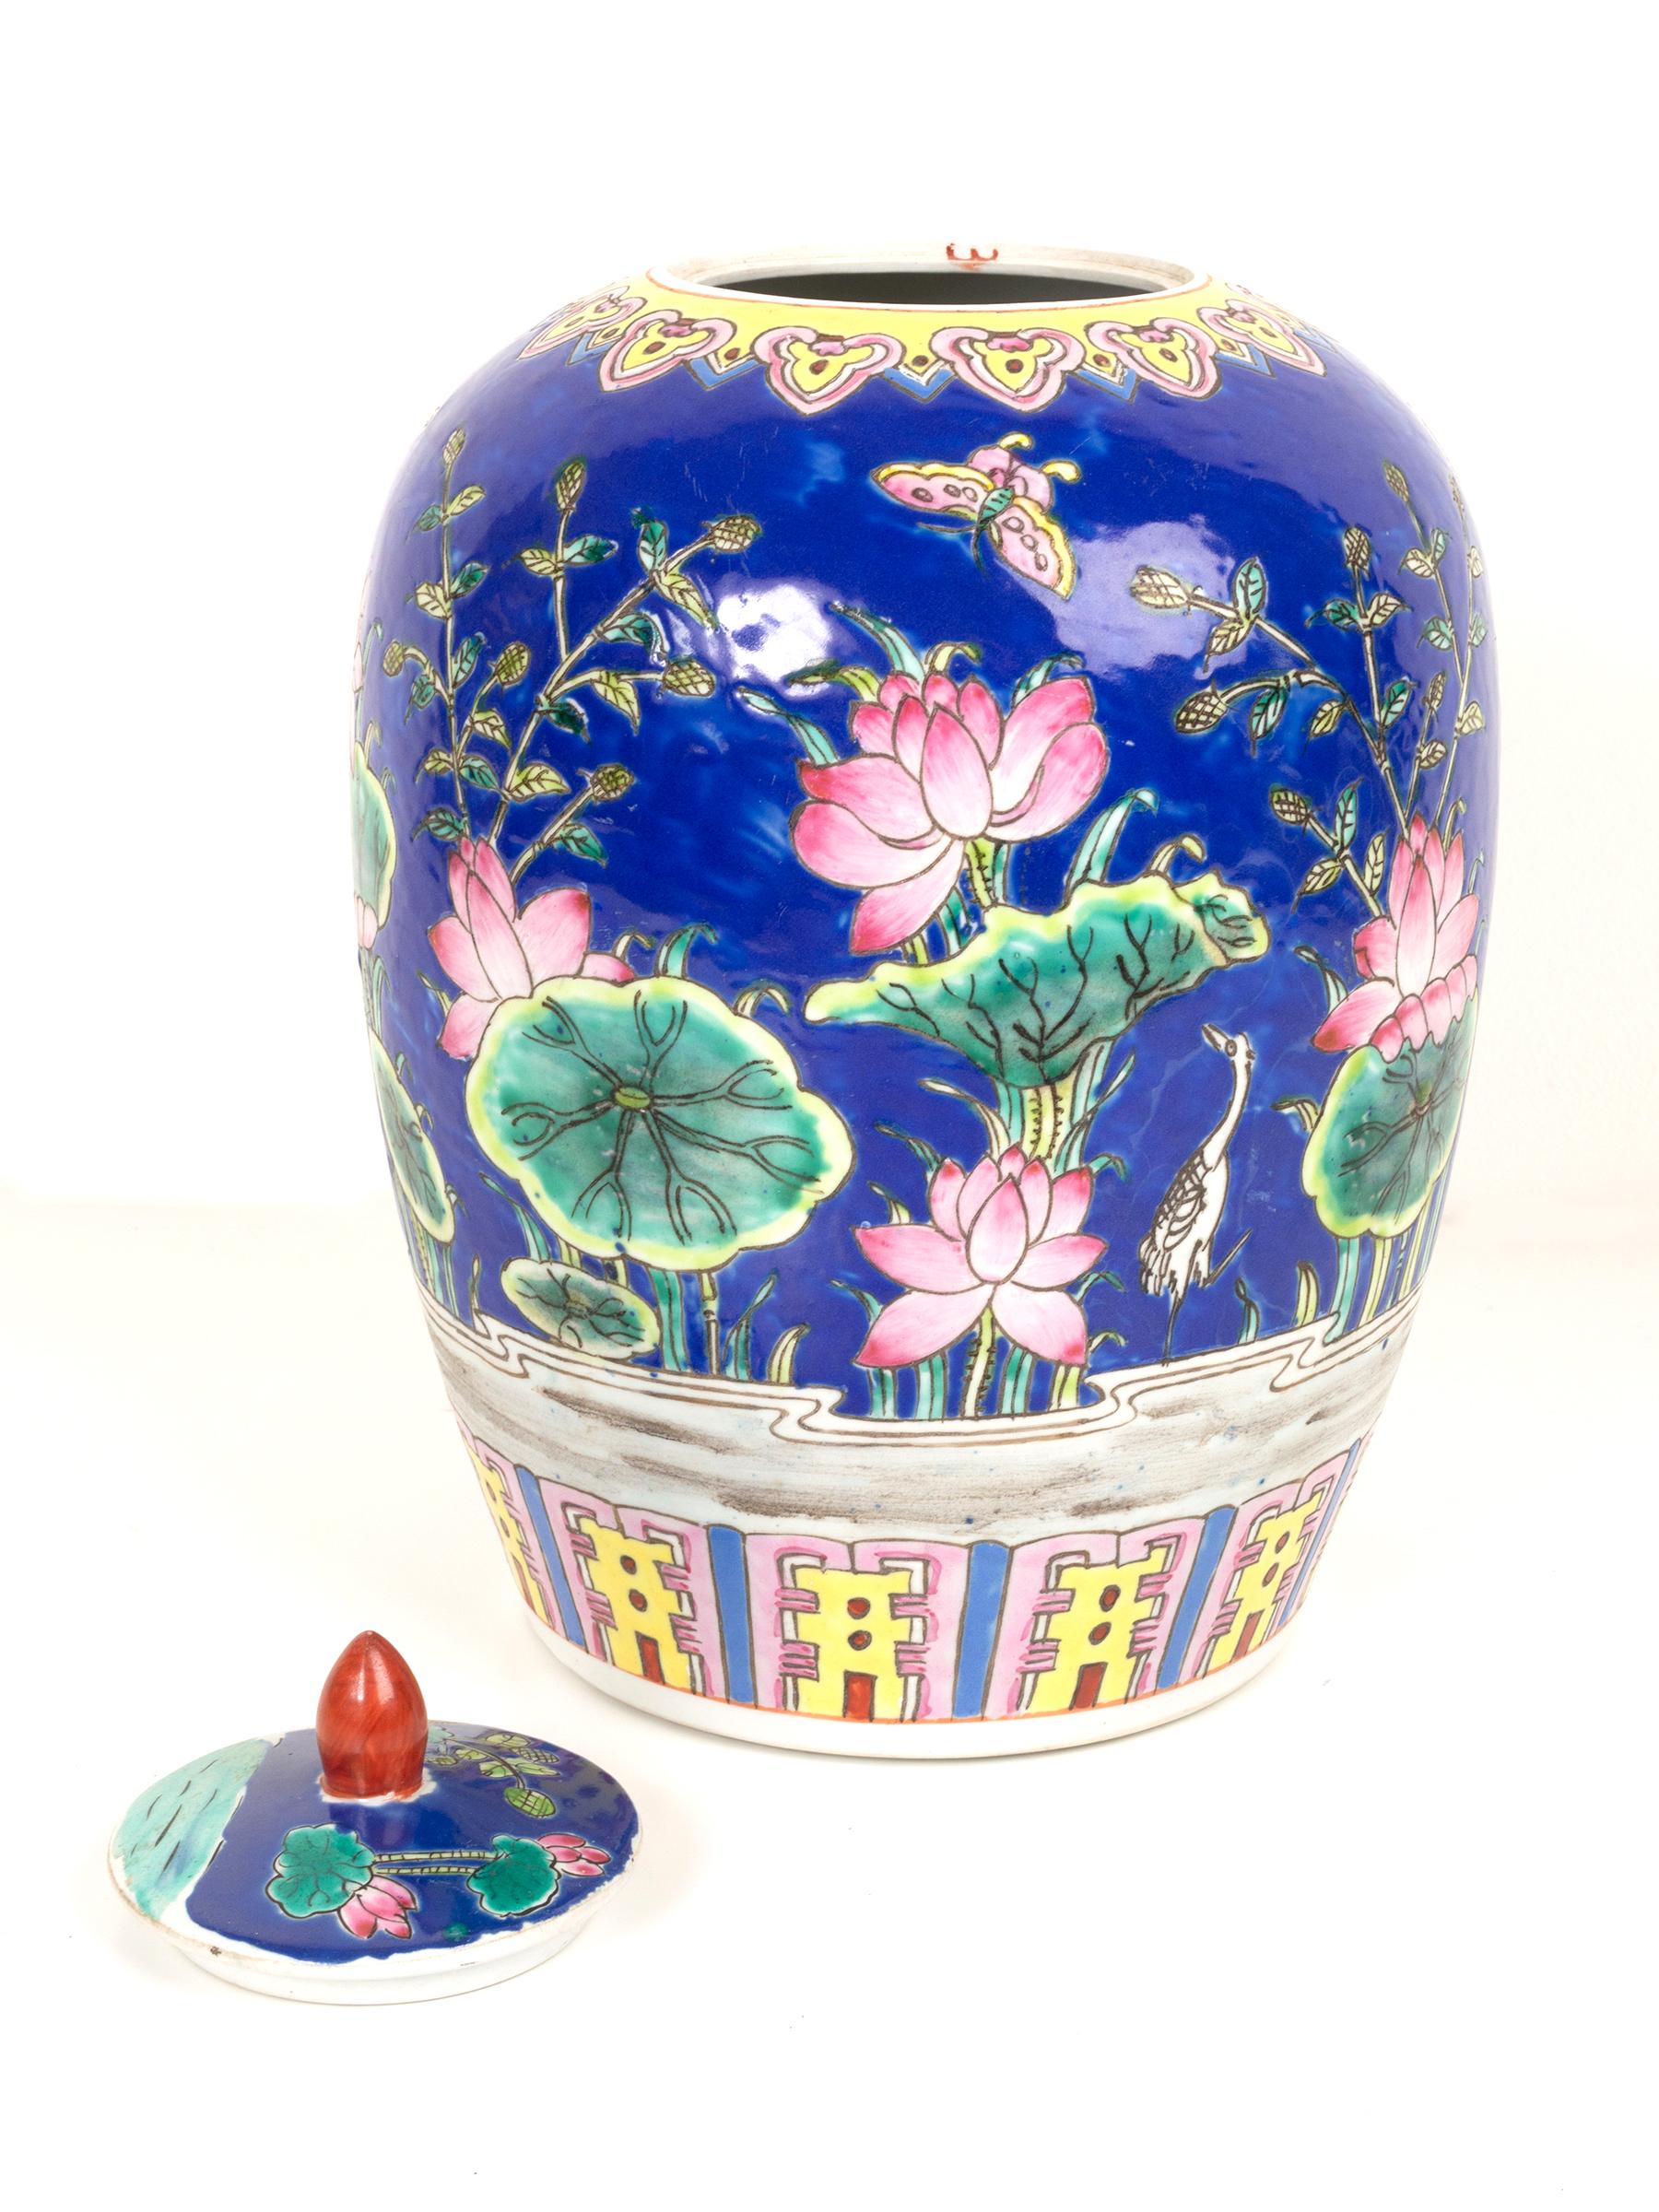 A large antique Chinese polychrome enameled ginger jar.
Handpainted in a rare colourway with beautiful enameled blue ground and with pink and green foliate detail.
Presented in excellent condition commensurate of age, free from chips or cracks.